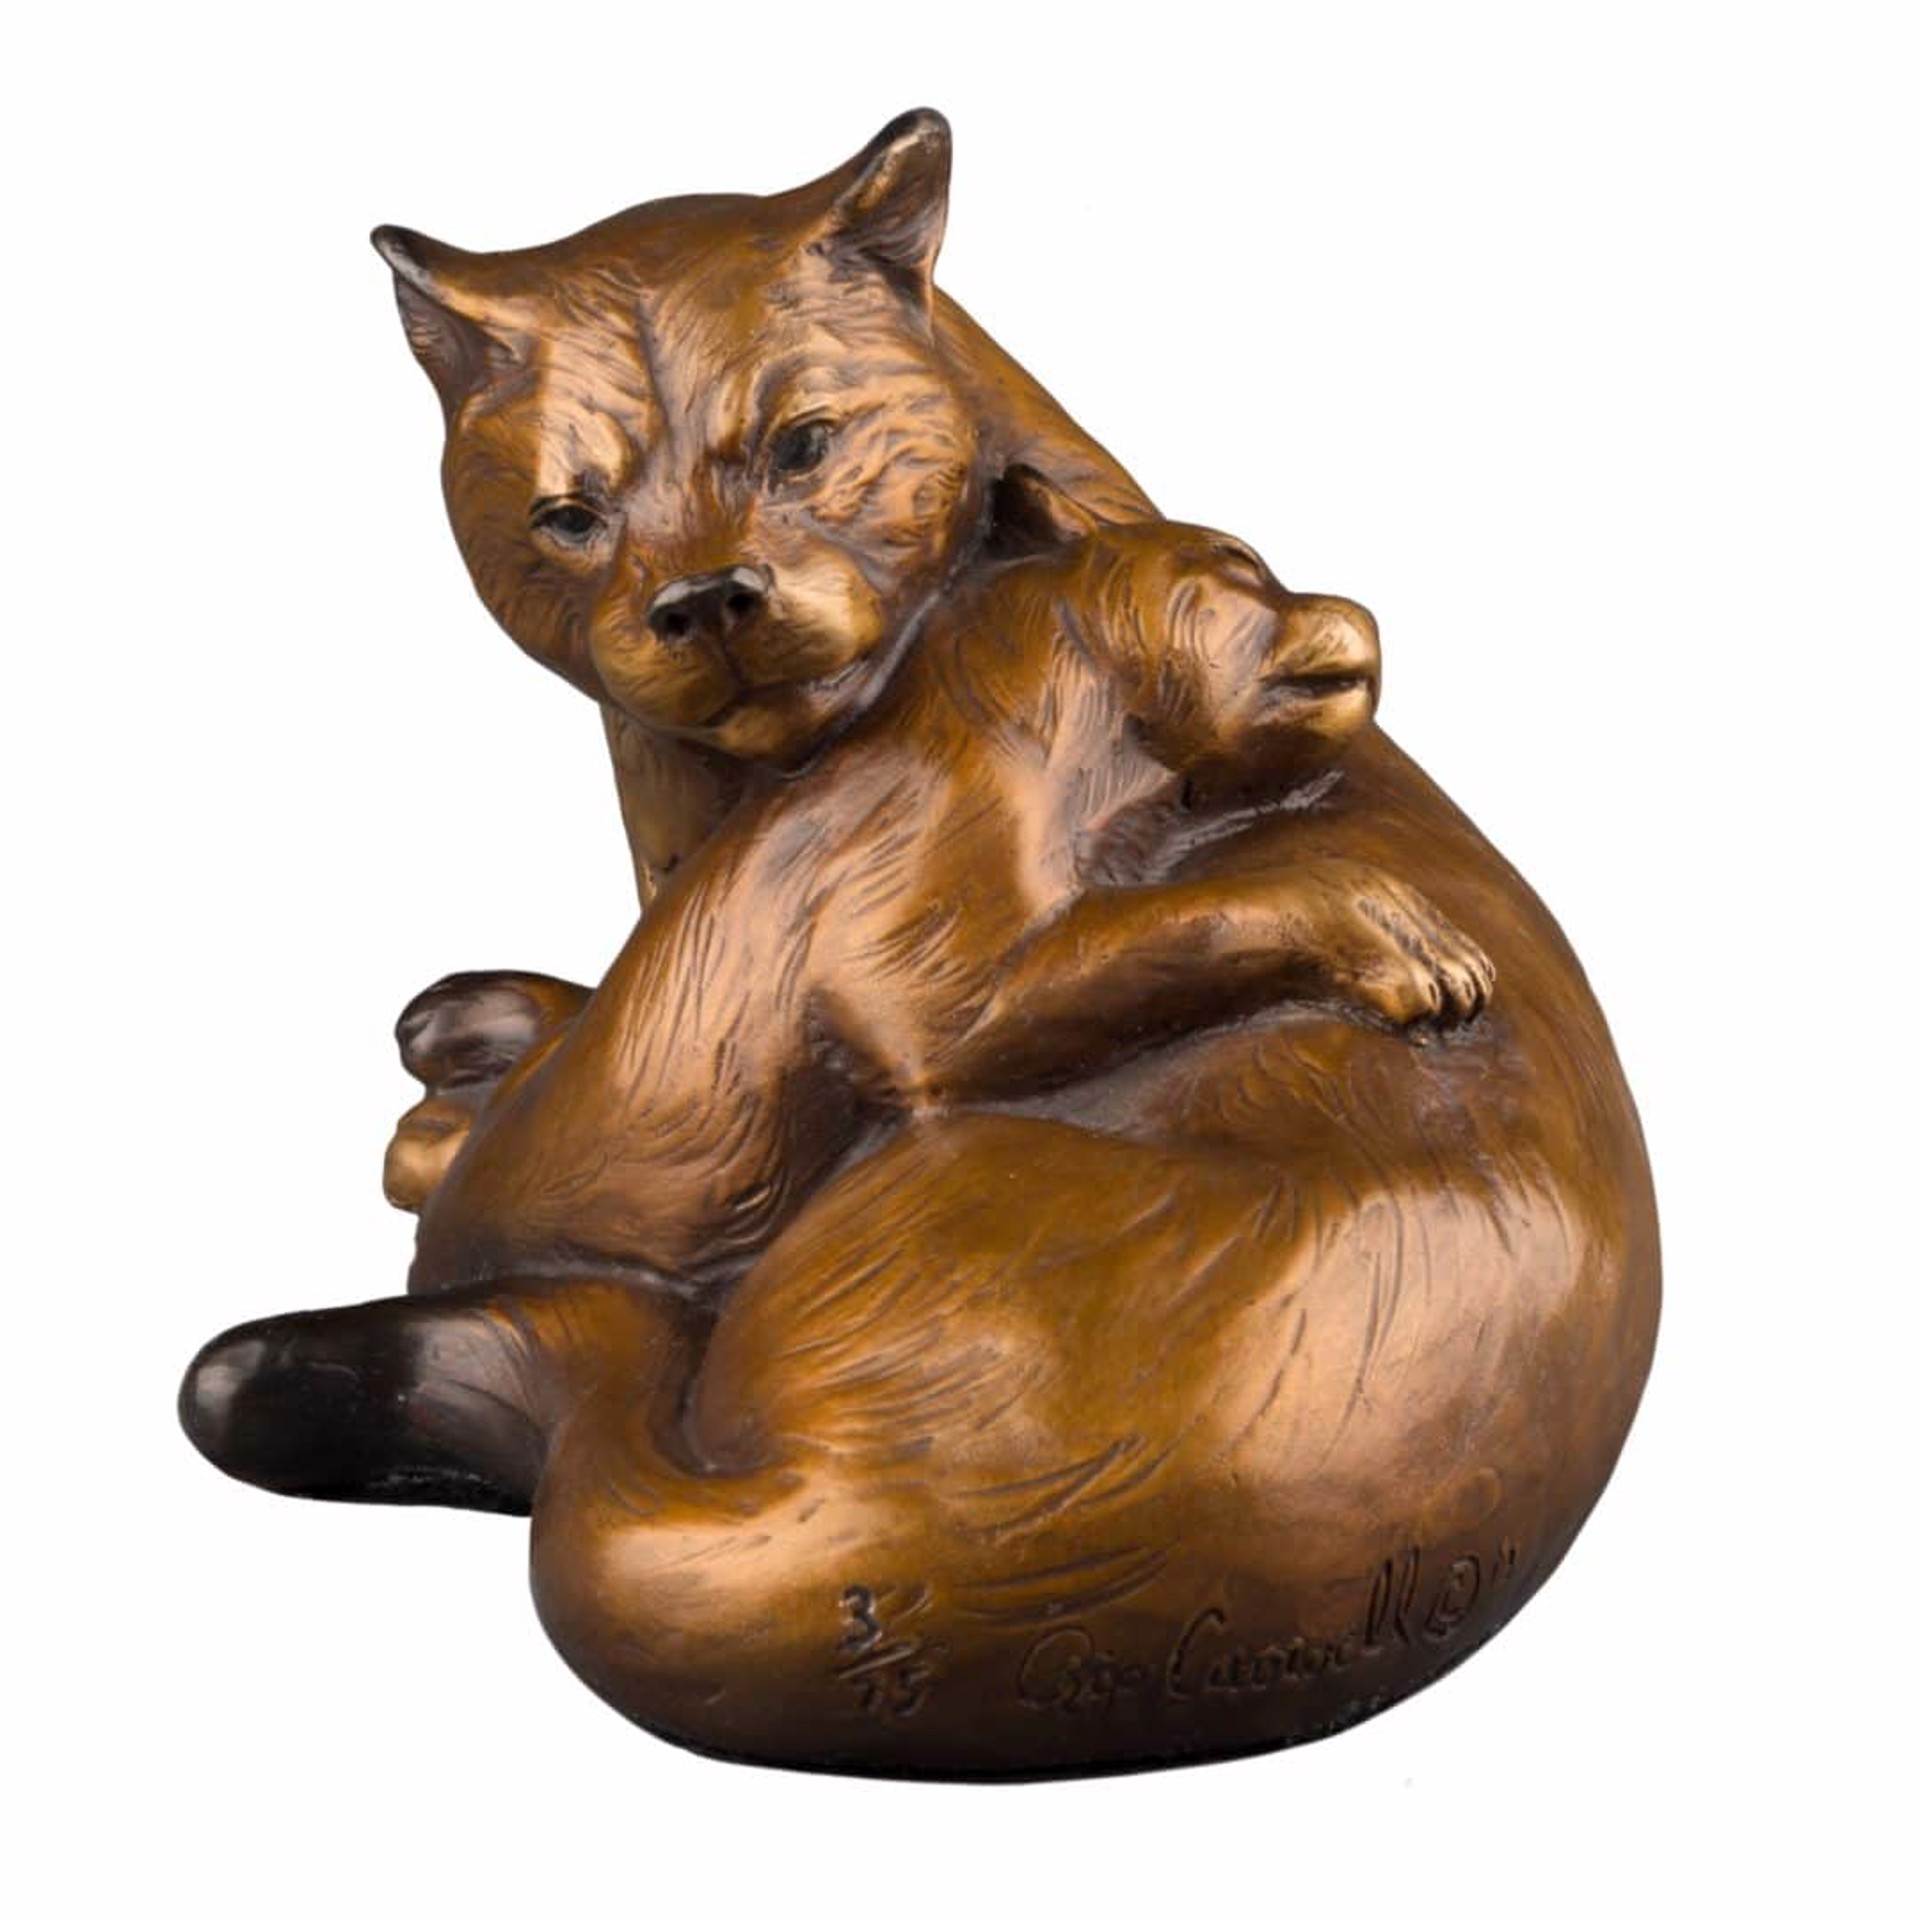 Mountain Lion and Cub Original Bronze Sculpture by Rip and Alison Caswell, Contemporary Fine Art, Modern Wildlife Art, Available At Gallery Wild